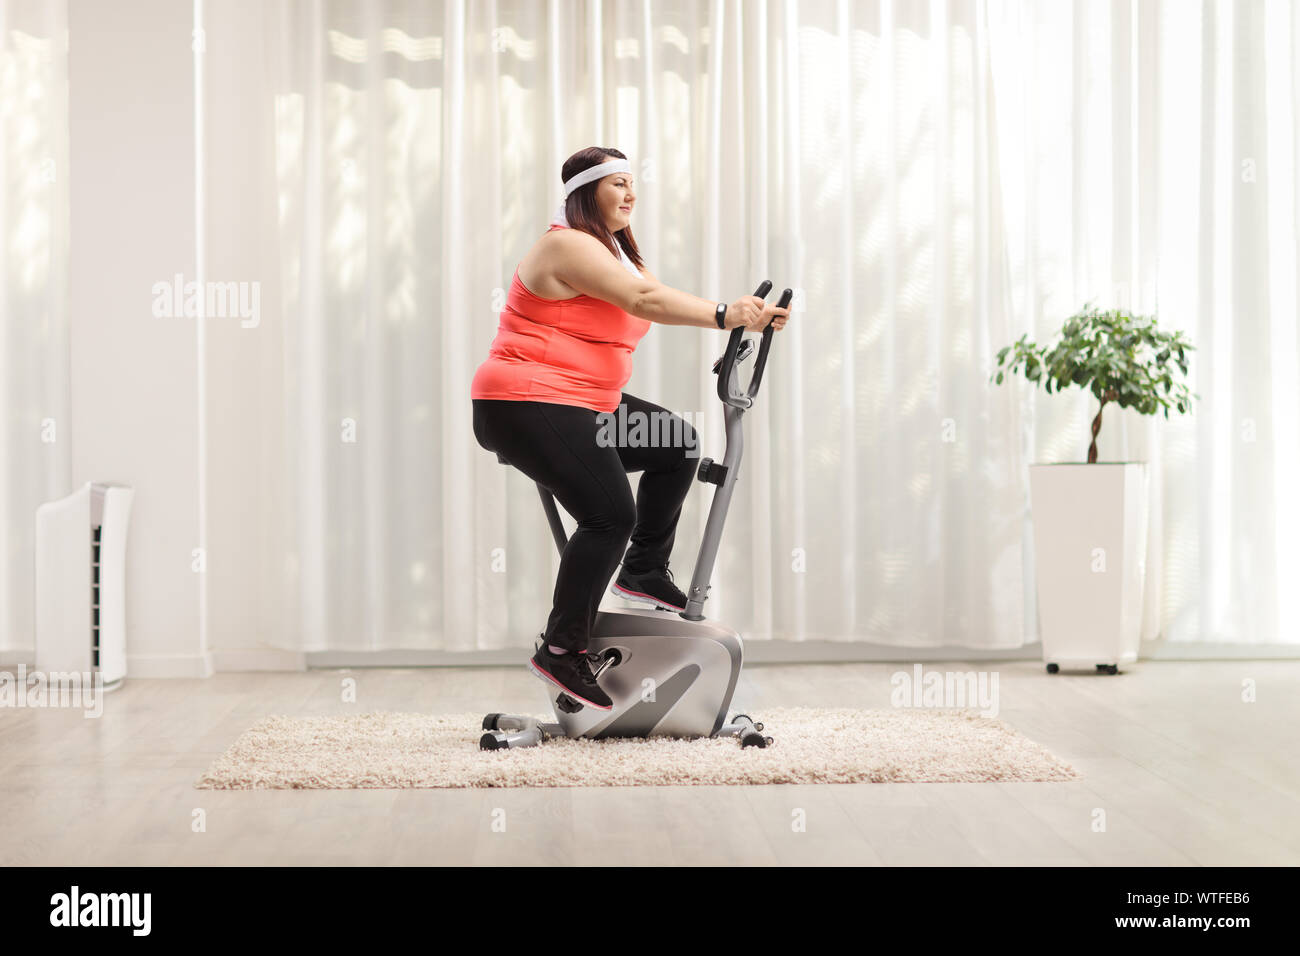 Overweight woman exercising on a stationary bike at home Stock Photo